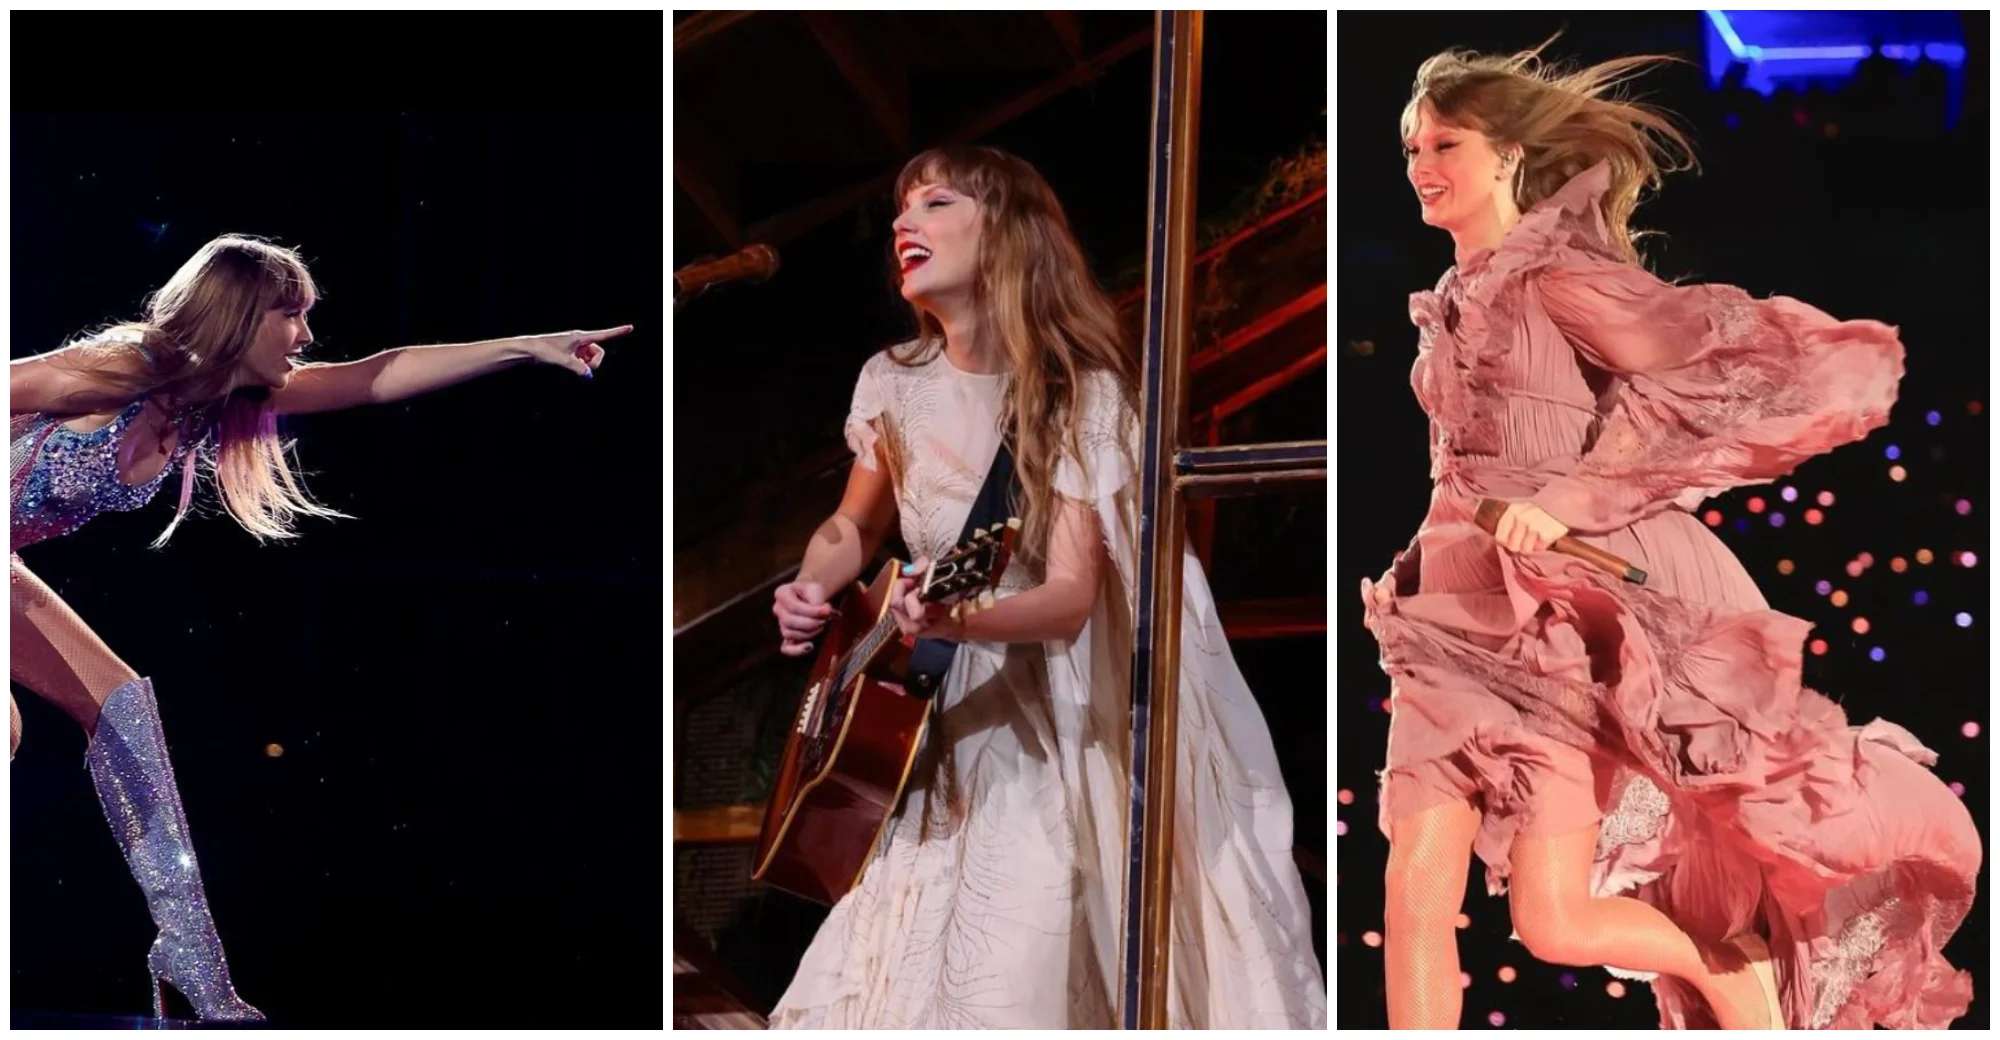 Everything You Need To Know For Taylor Swift's: The Eras Tour Concert In Singapore